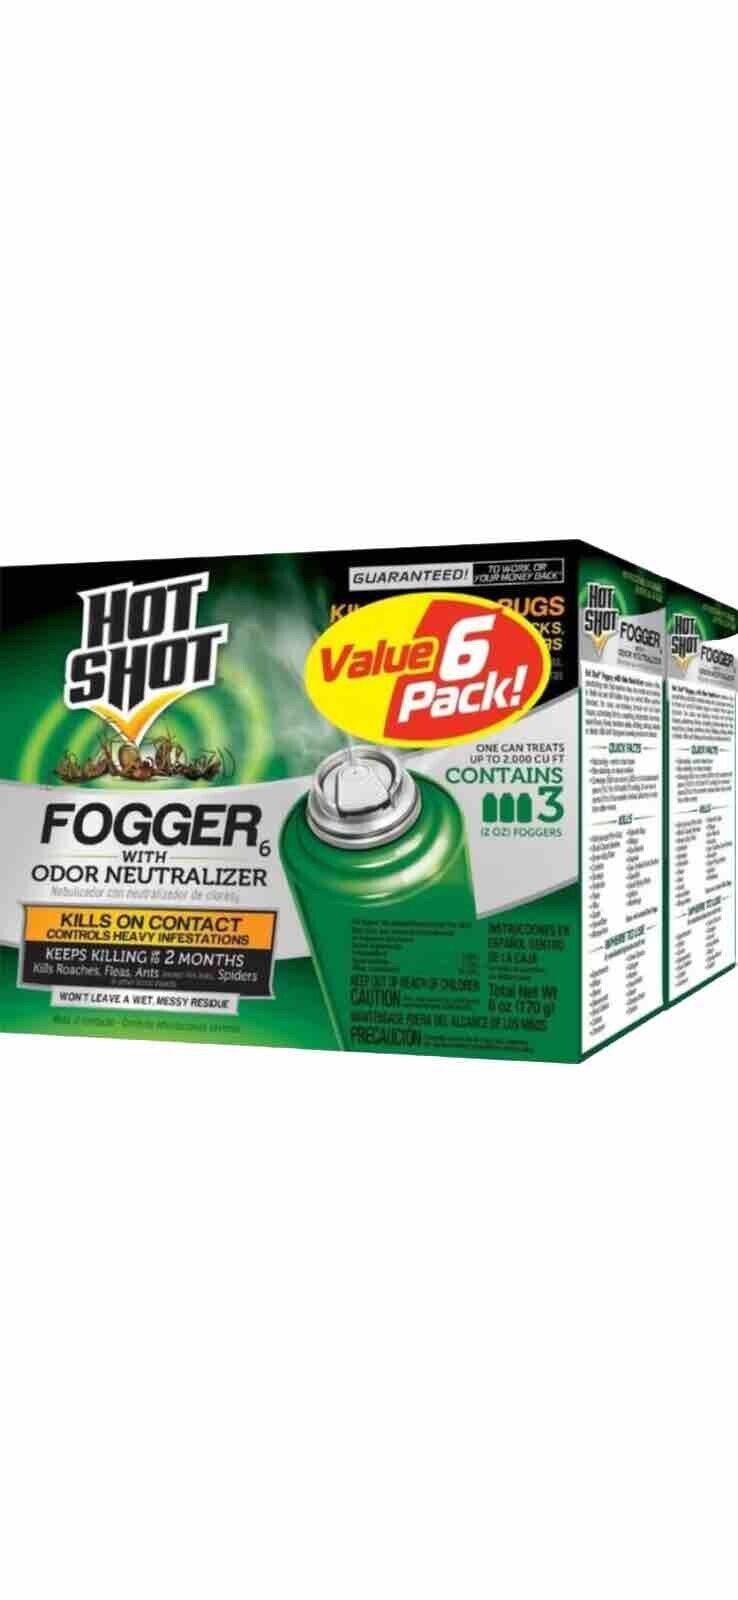 6 Pack Hot Shot Indoor Fogger With Odor Neutralizer, 6-2 oz Cans Kills Roaches 